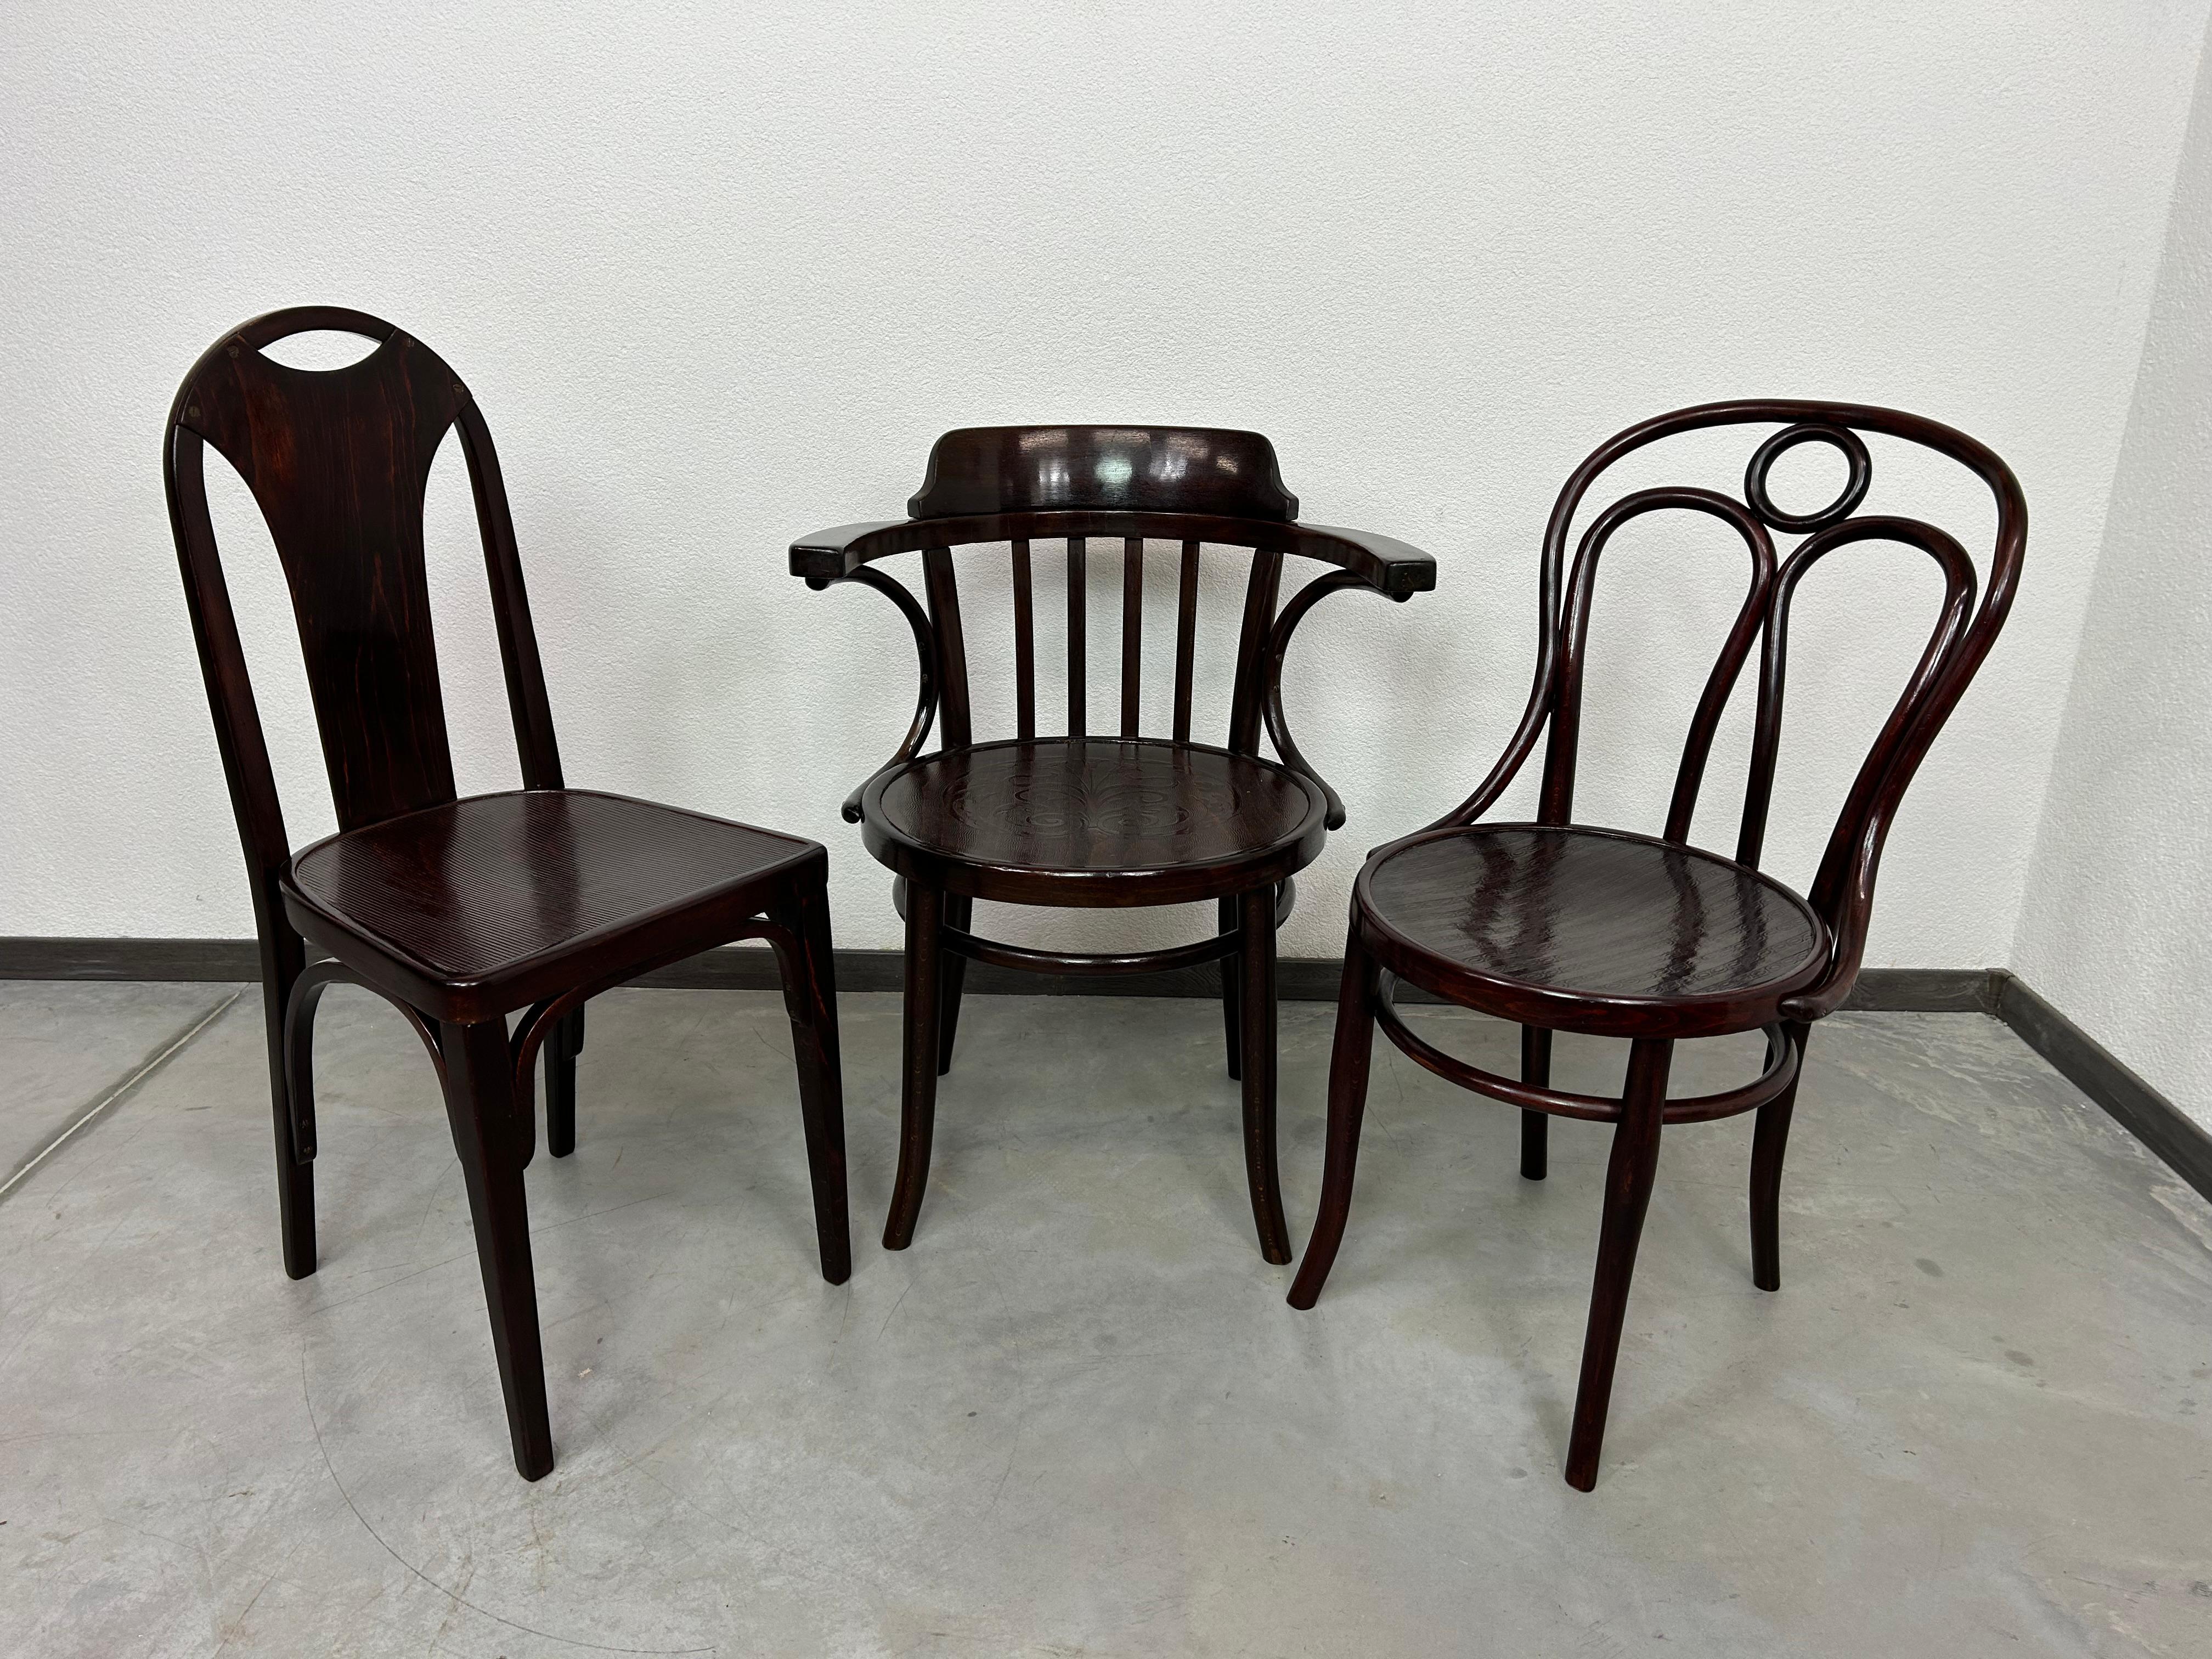 Secession dining chair no.373 atr. Josef Hoffmann/Otto Prutscher for J&J Kohn professionally stained and repolished.